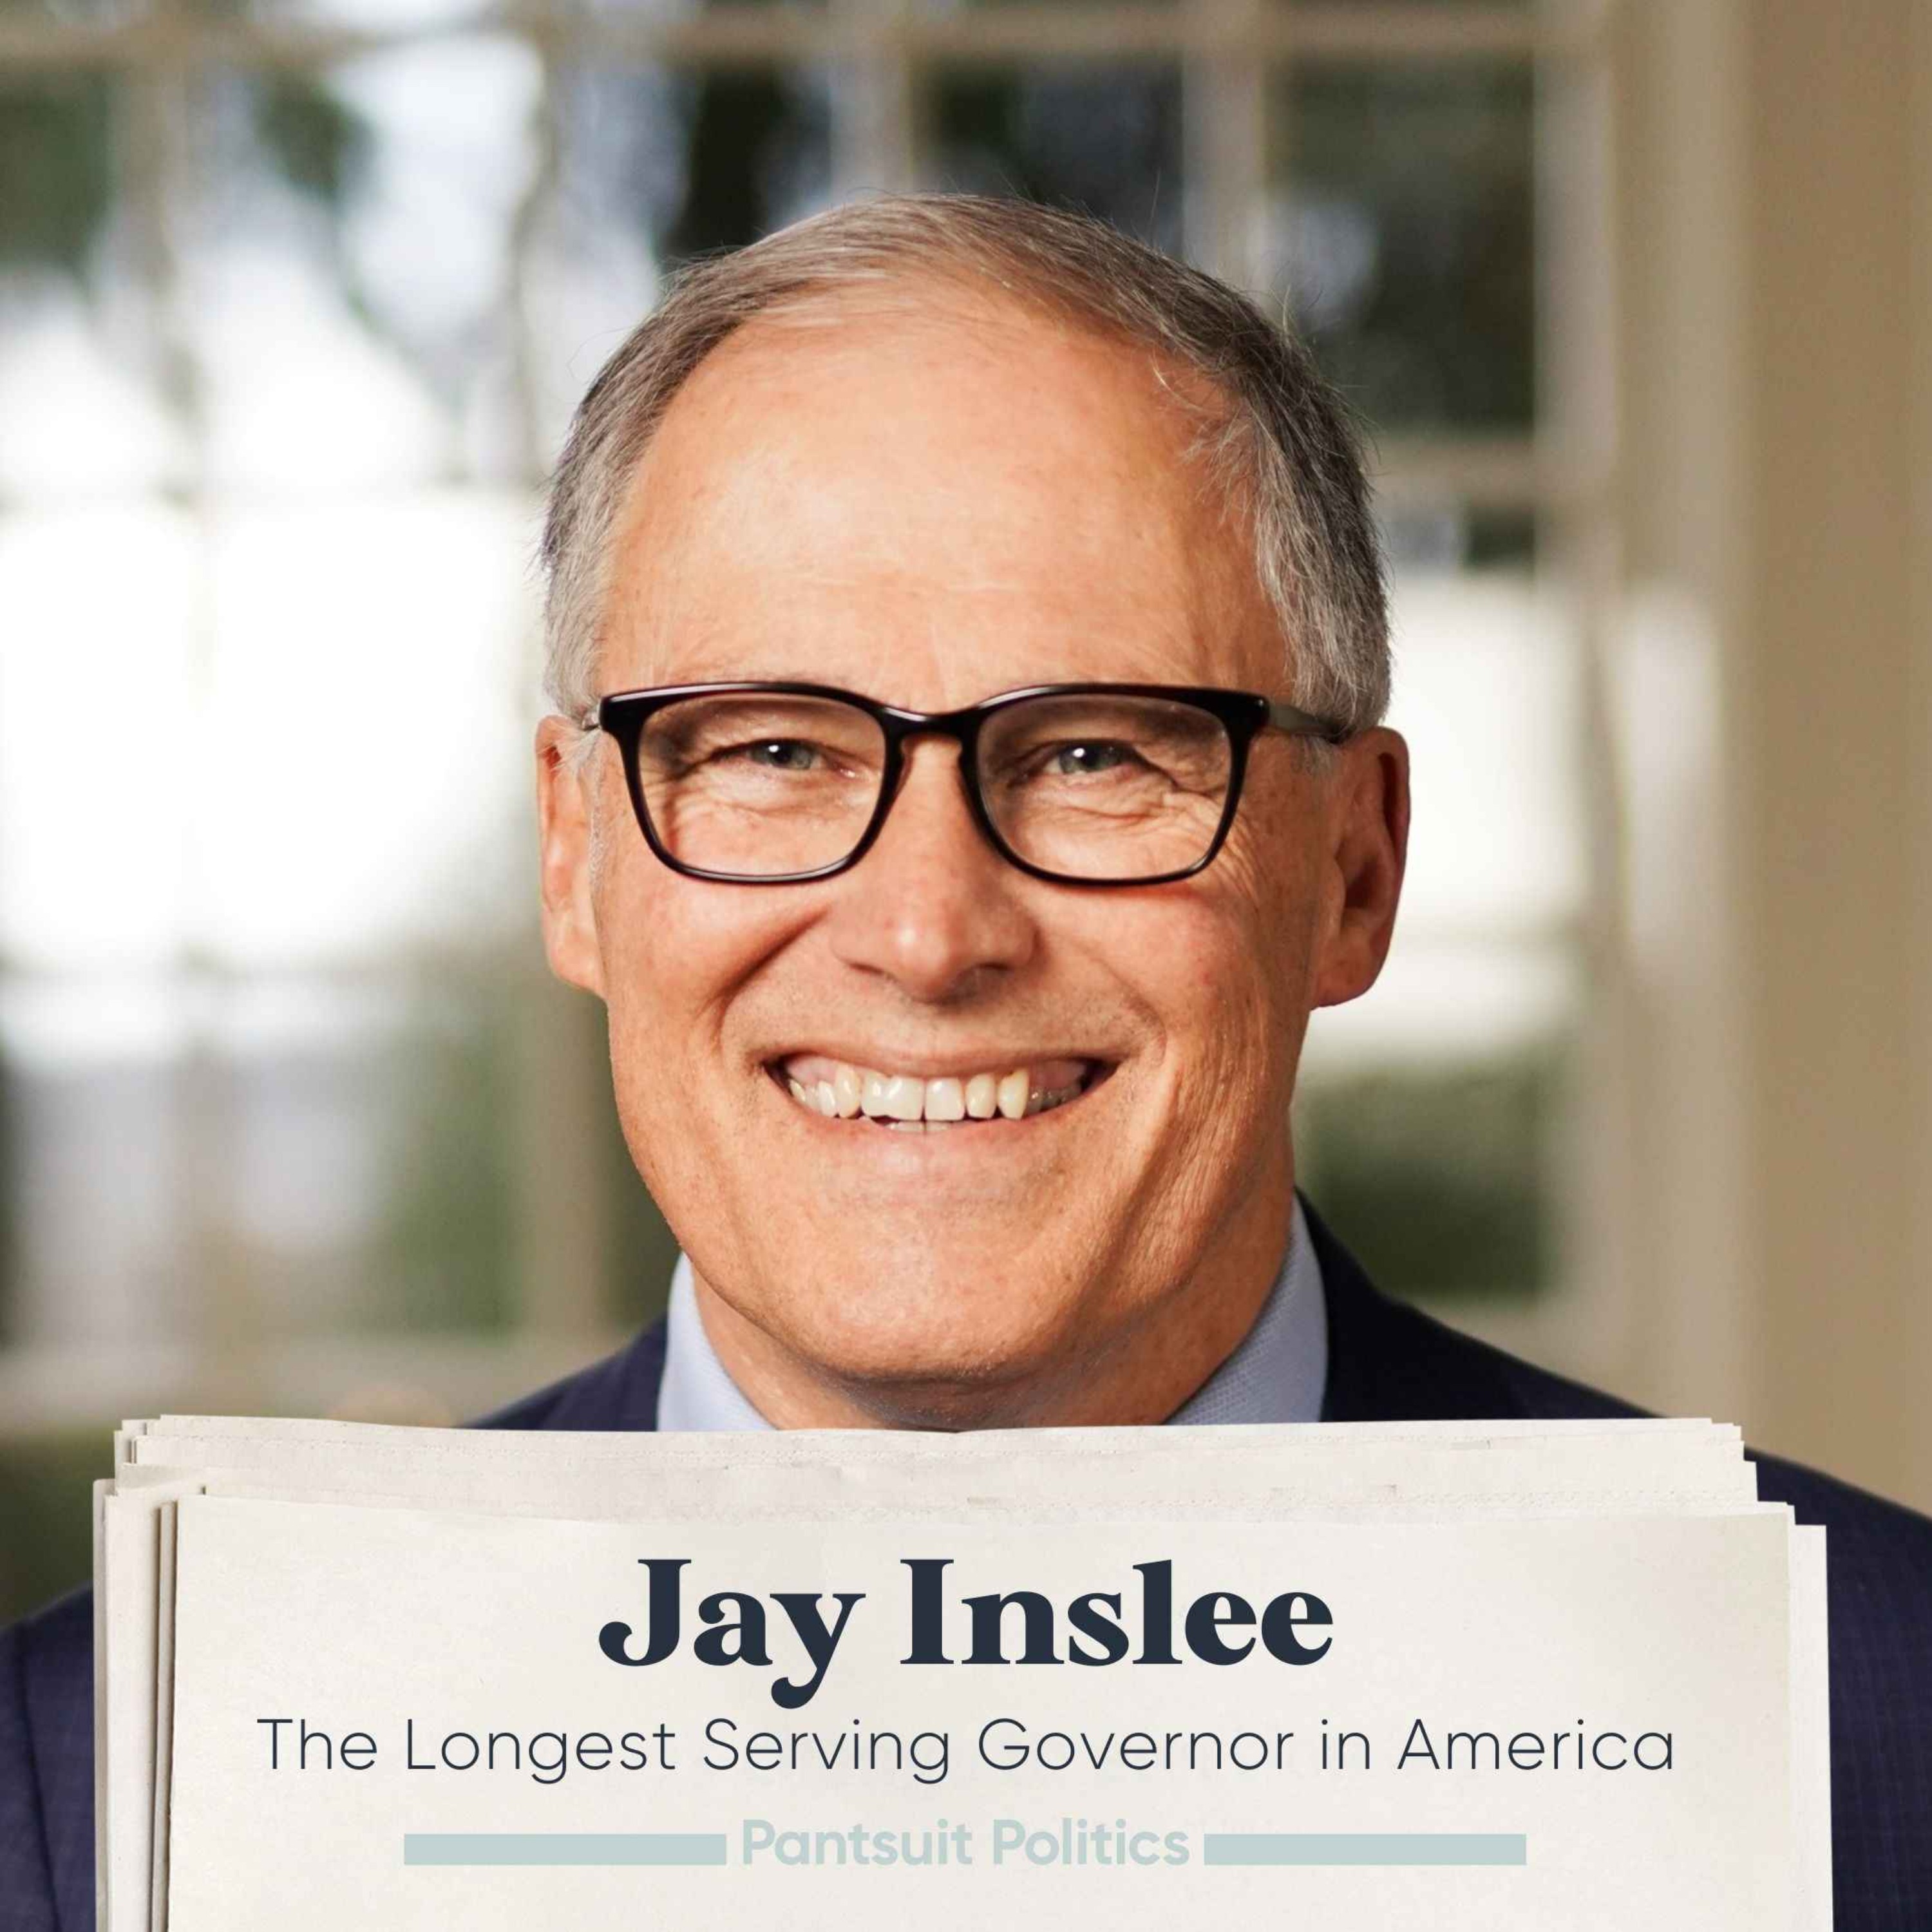 Jay Inslee: The Longest Serving Governor in America